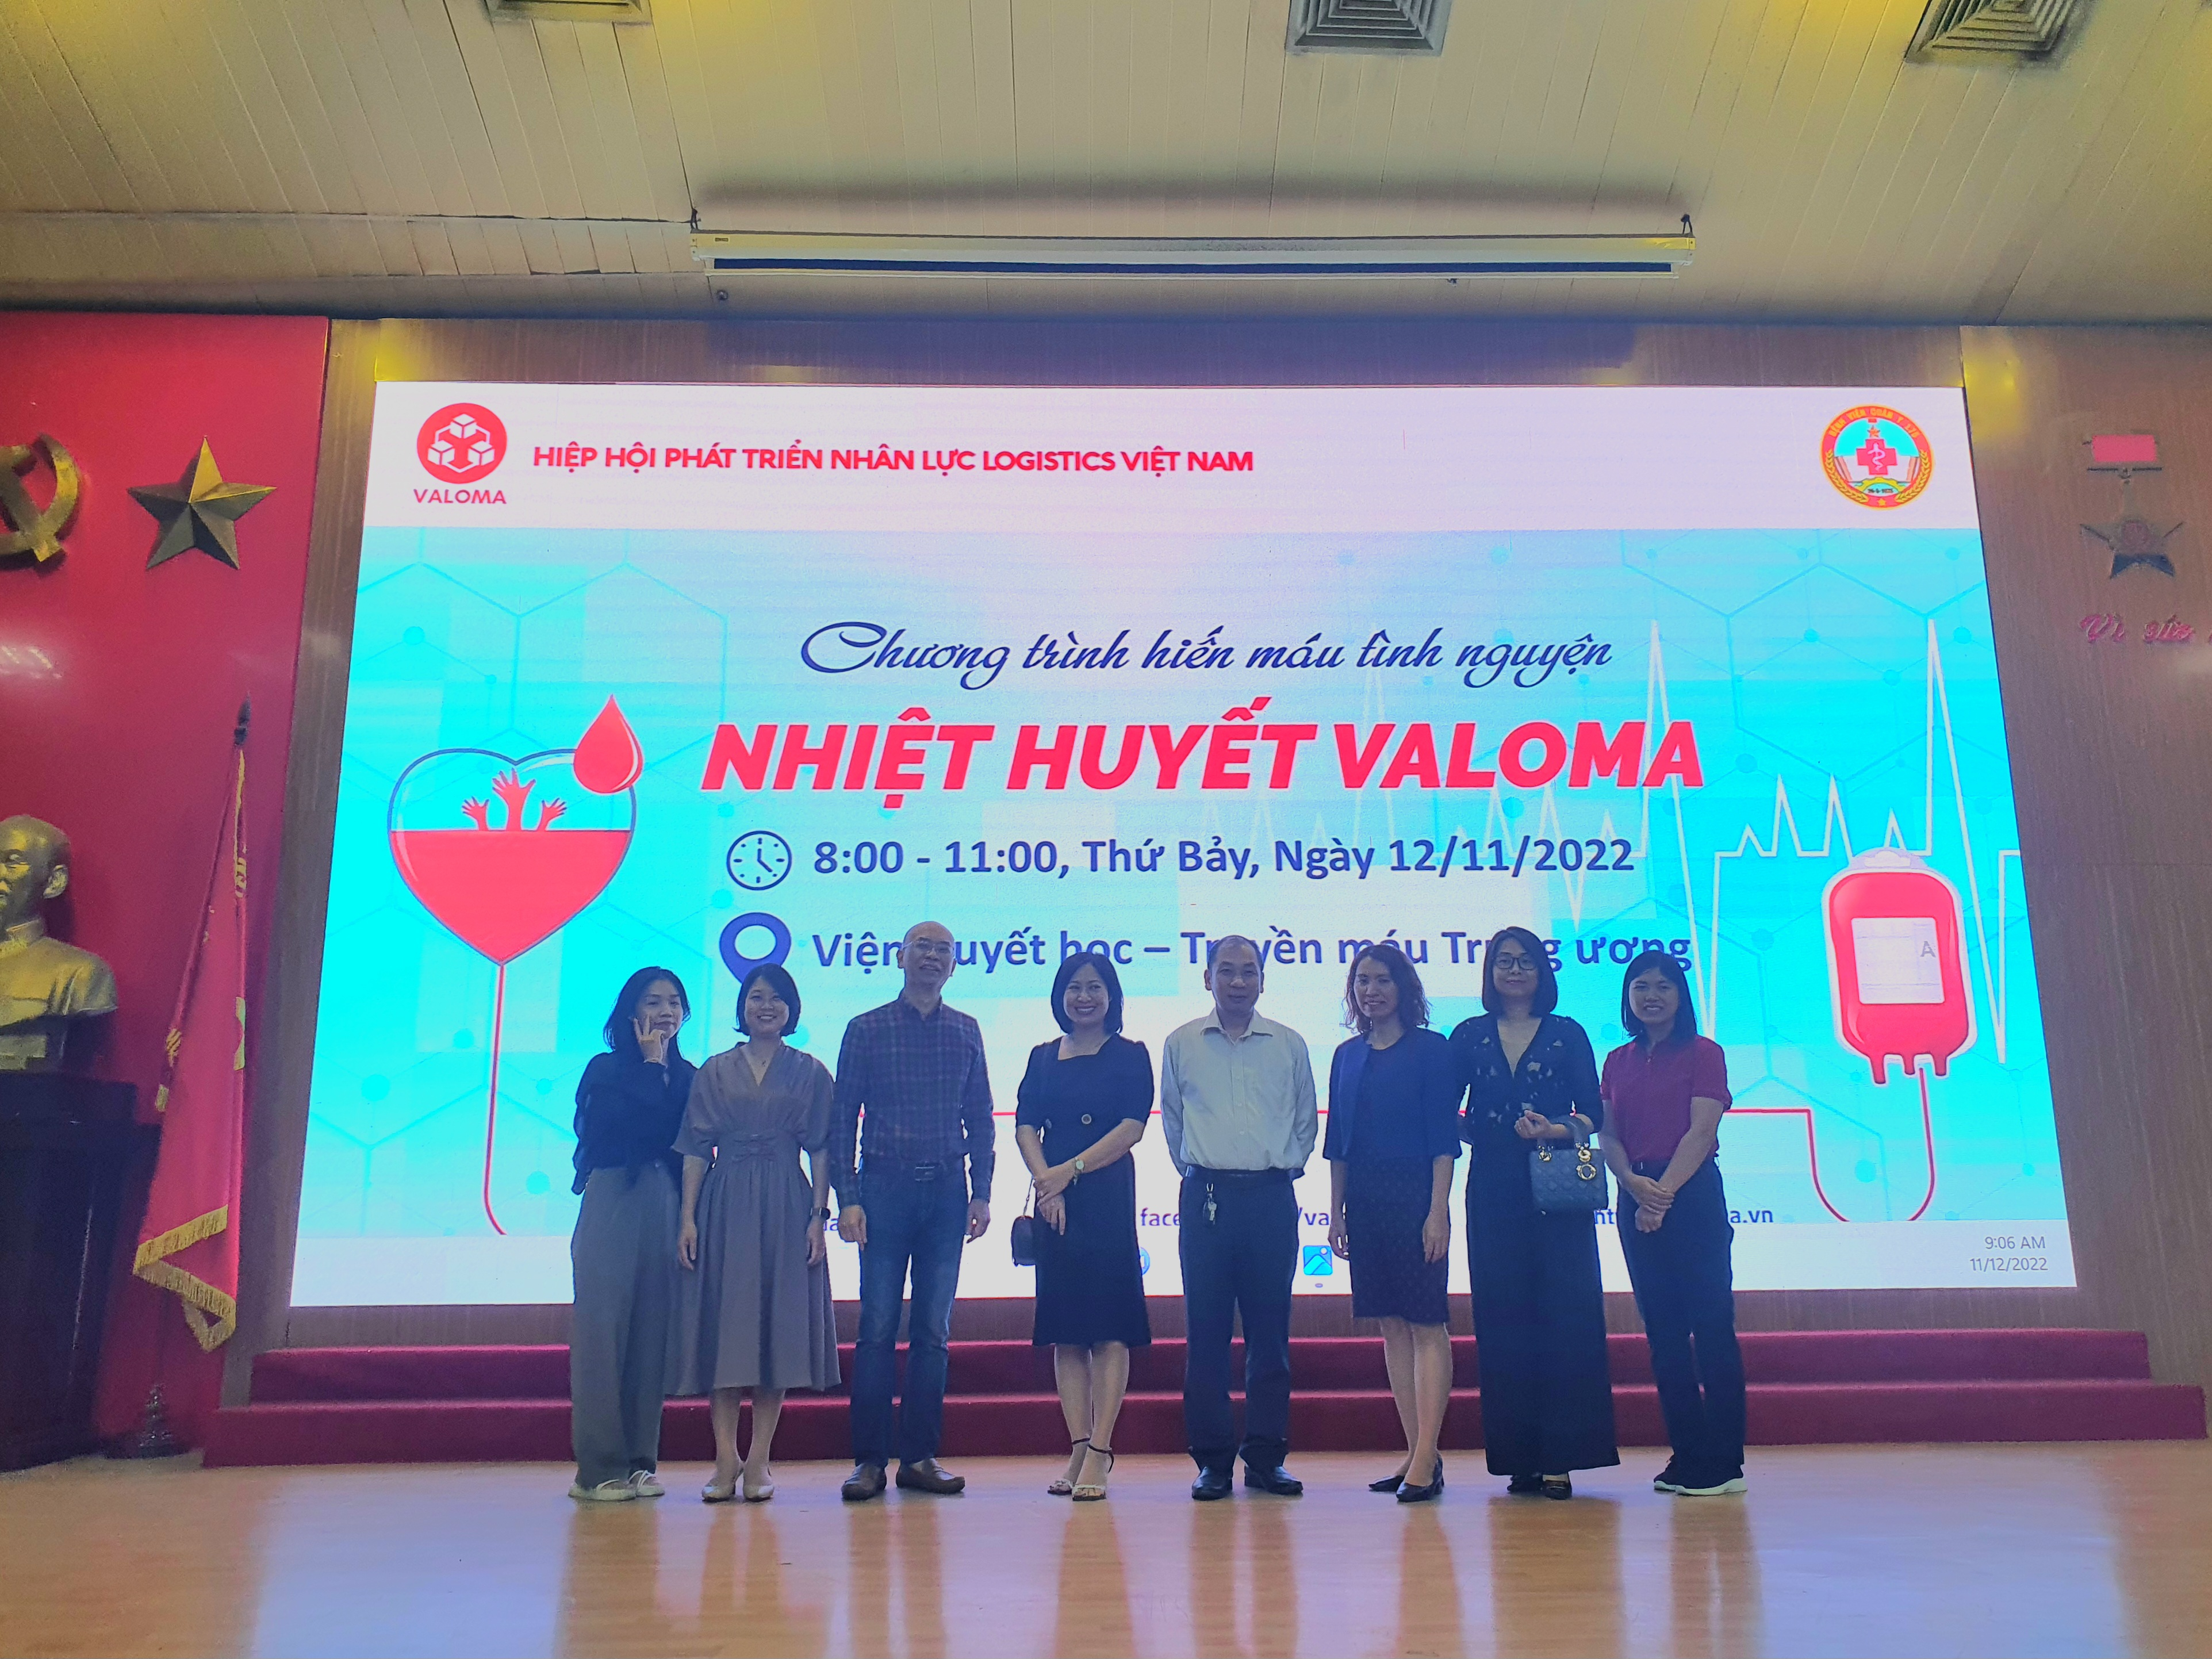 Awarding gifts to patients at National Institute of Hematology and Blood Transfusion